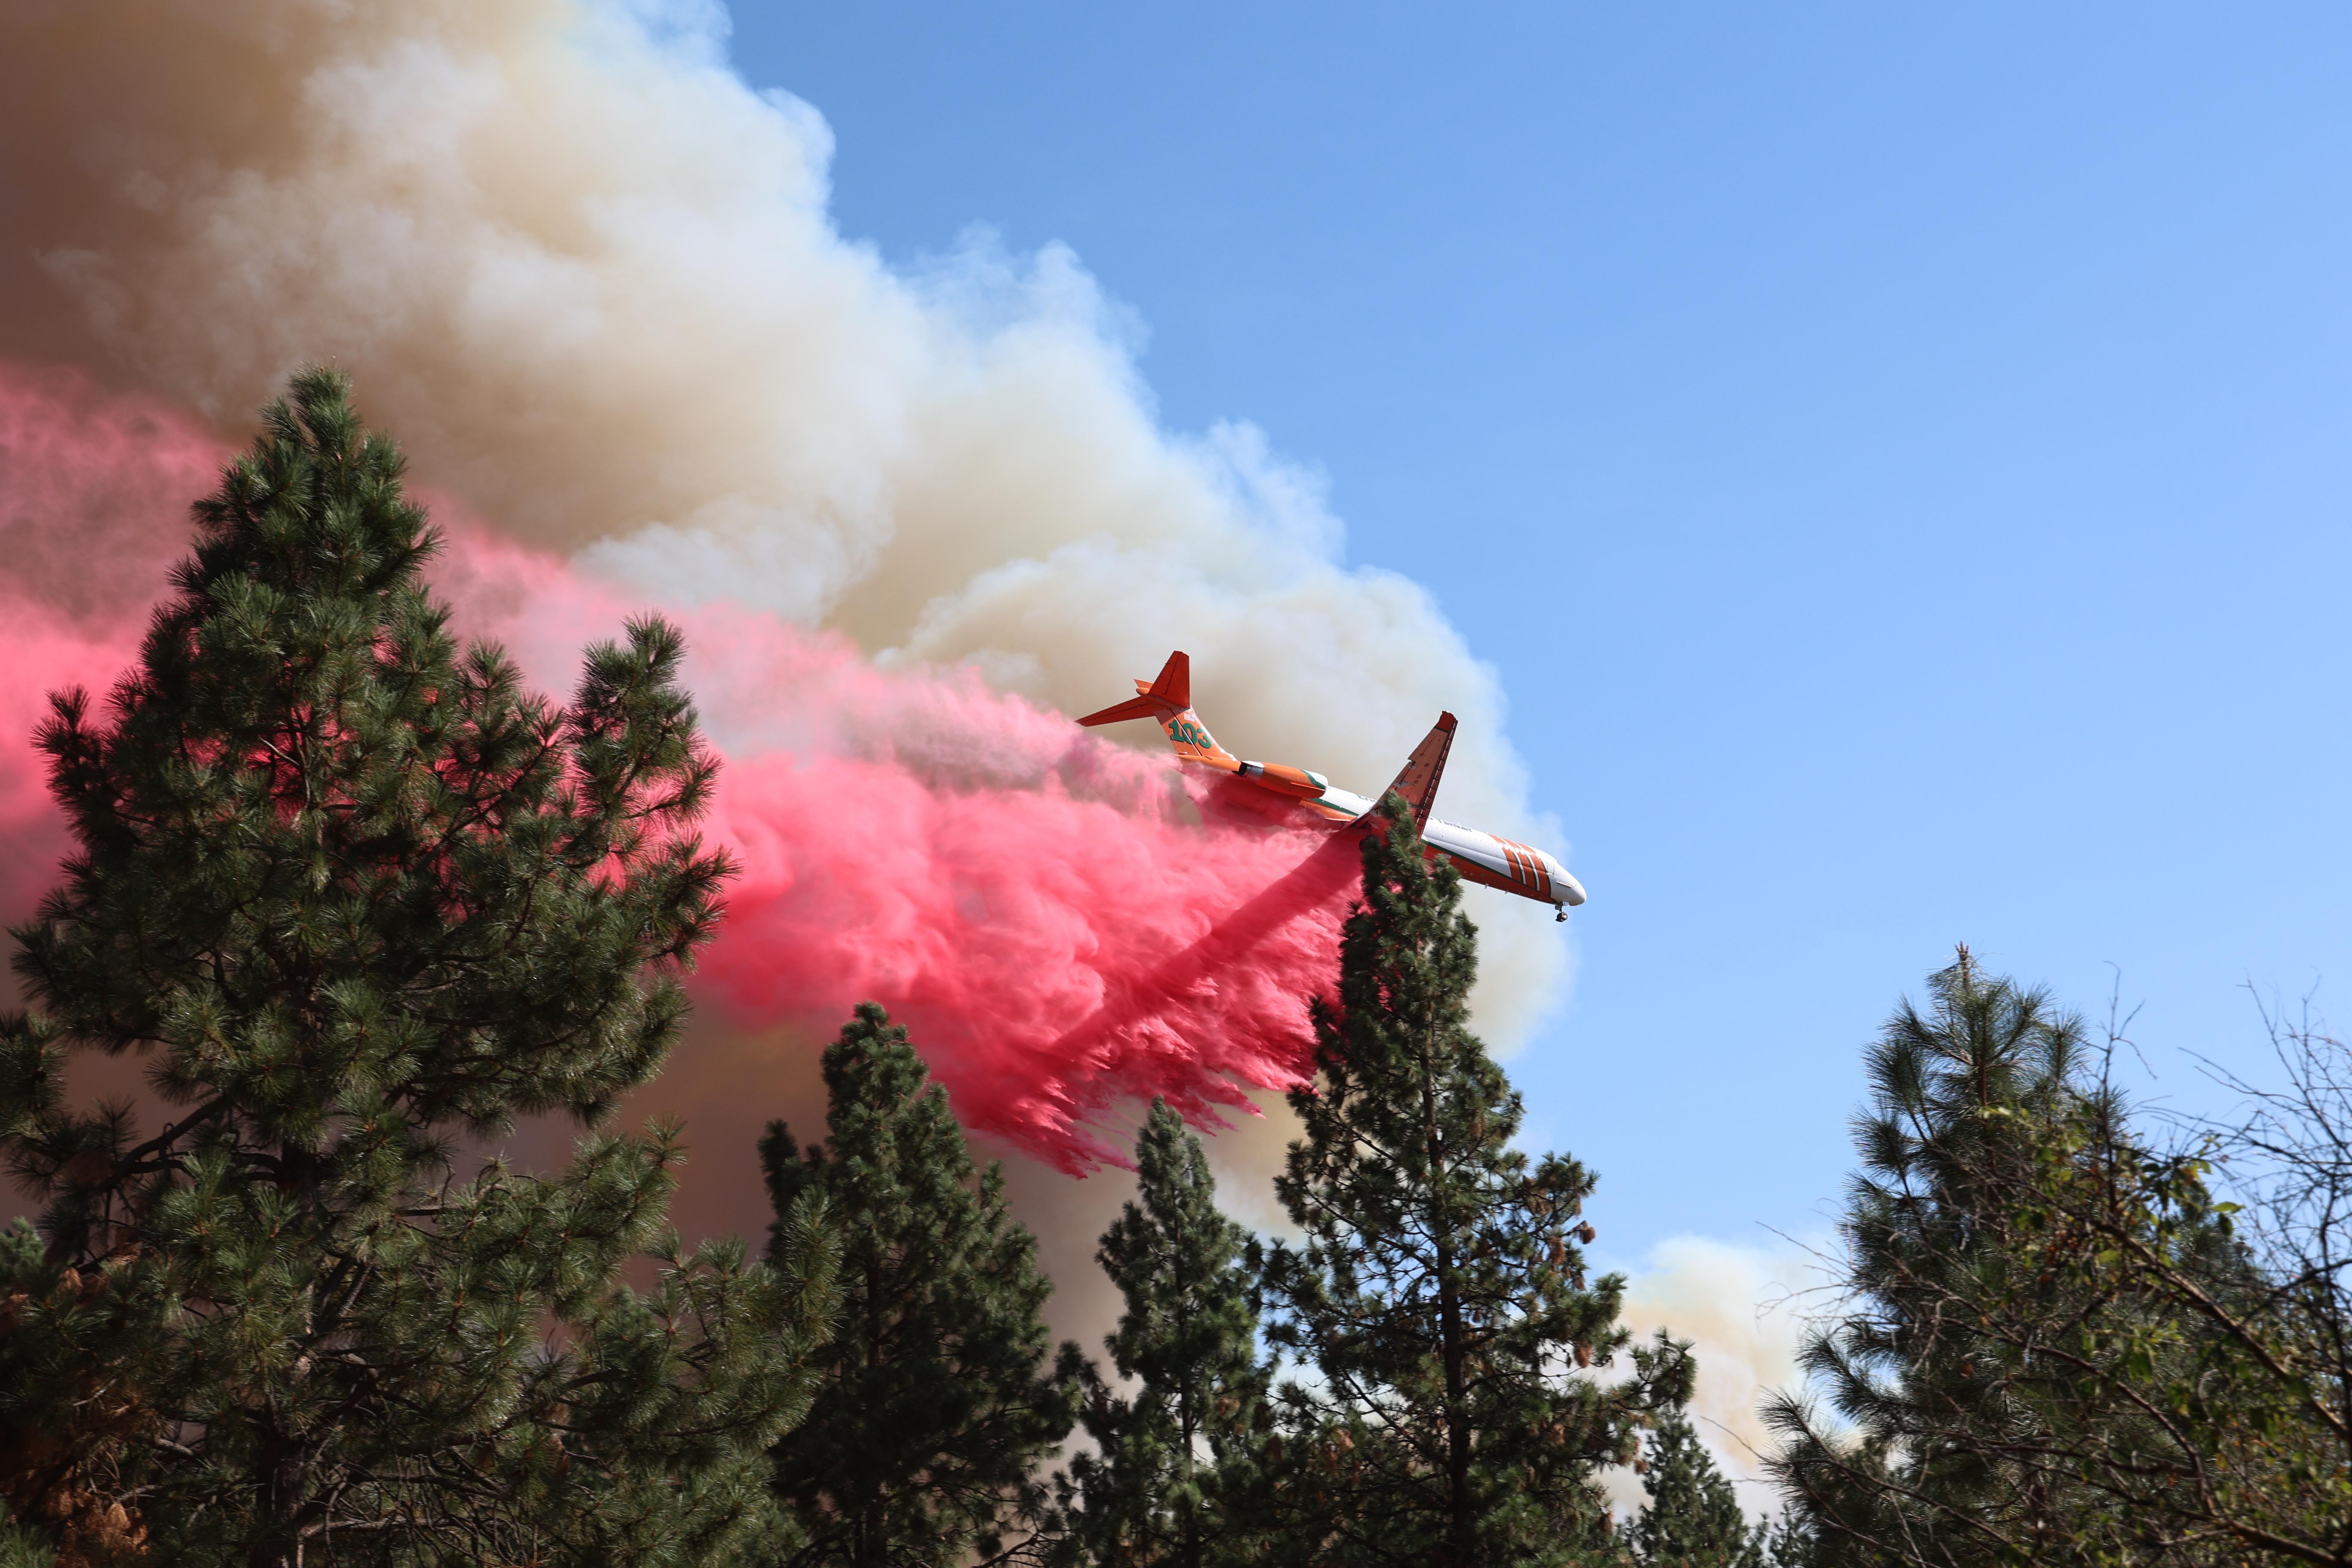 an air tanker flies at the edge of thick smoke against blue sky and pink retardant is streaming out of the underside of the plane onto tall, dense coniferous trees